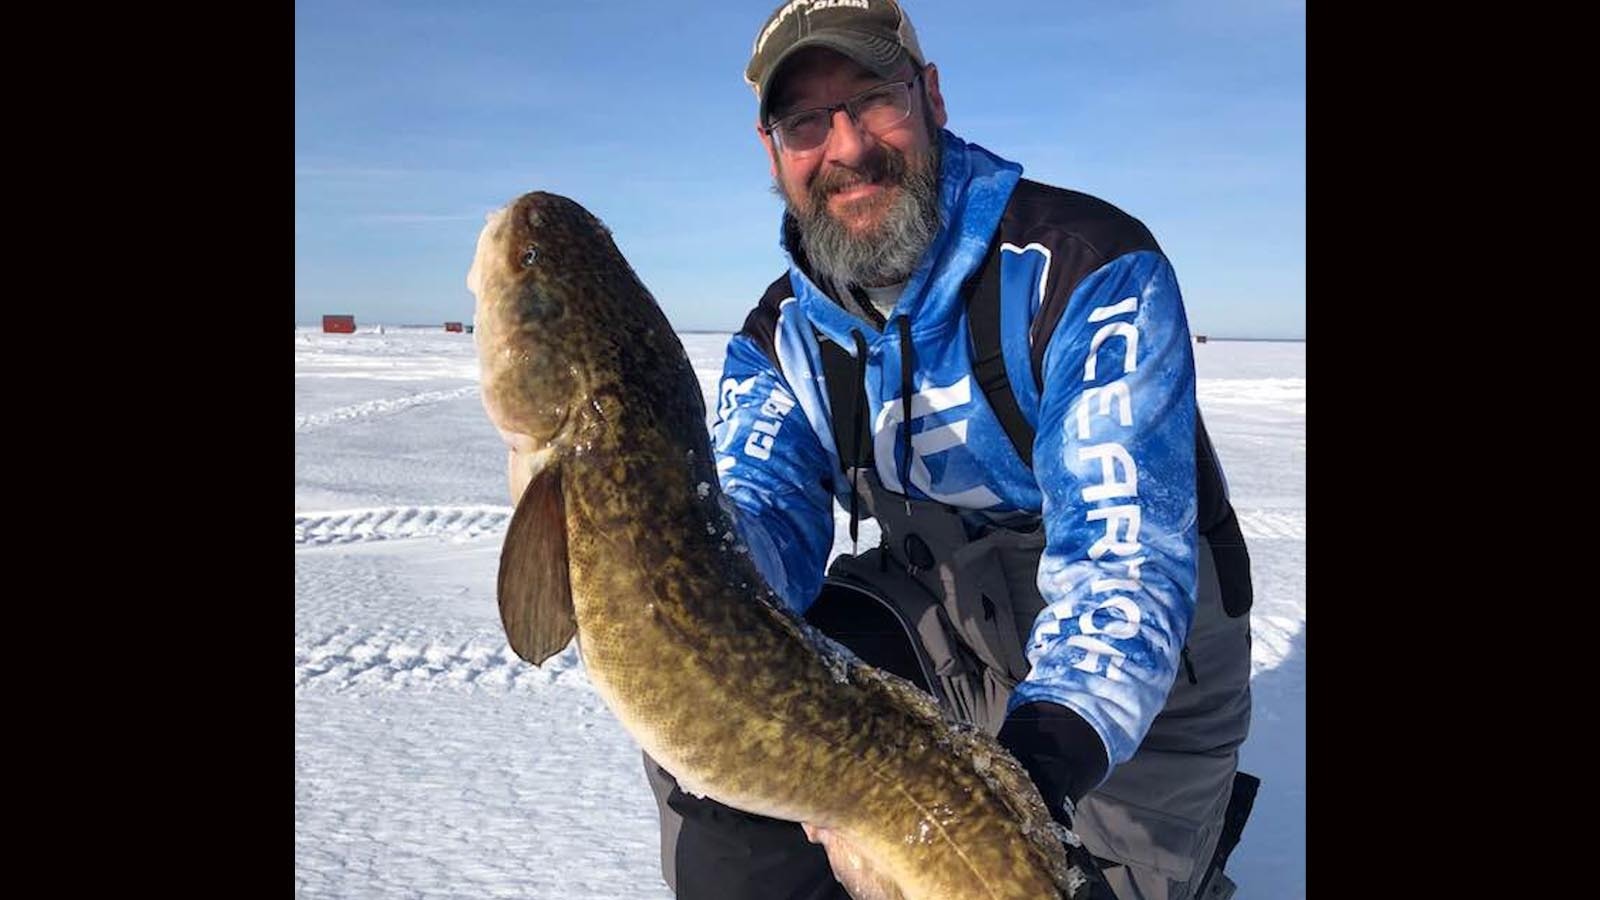 Best ICE FISHING Lures to Catch BURBOT!!! (Burbot Fishing Tips